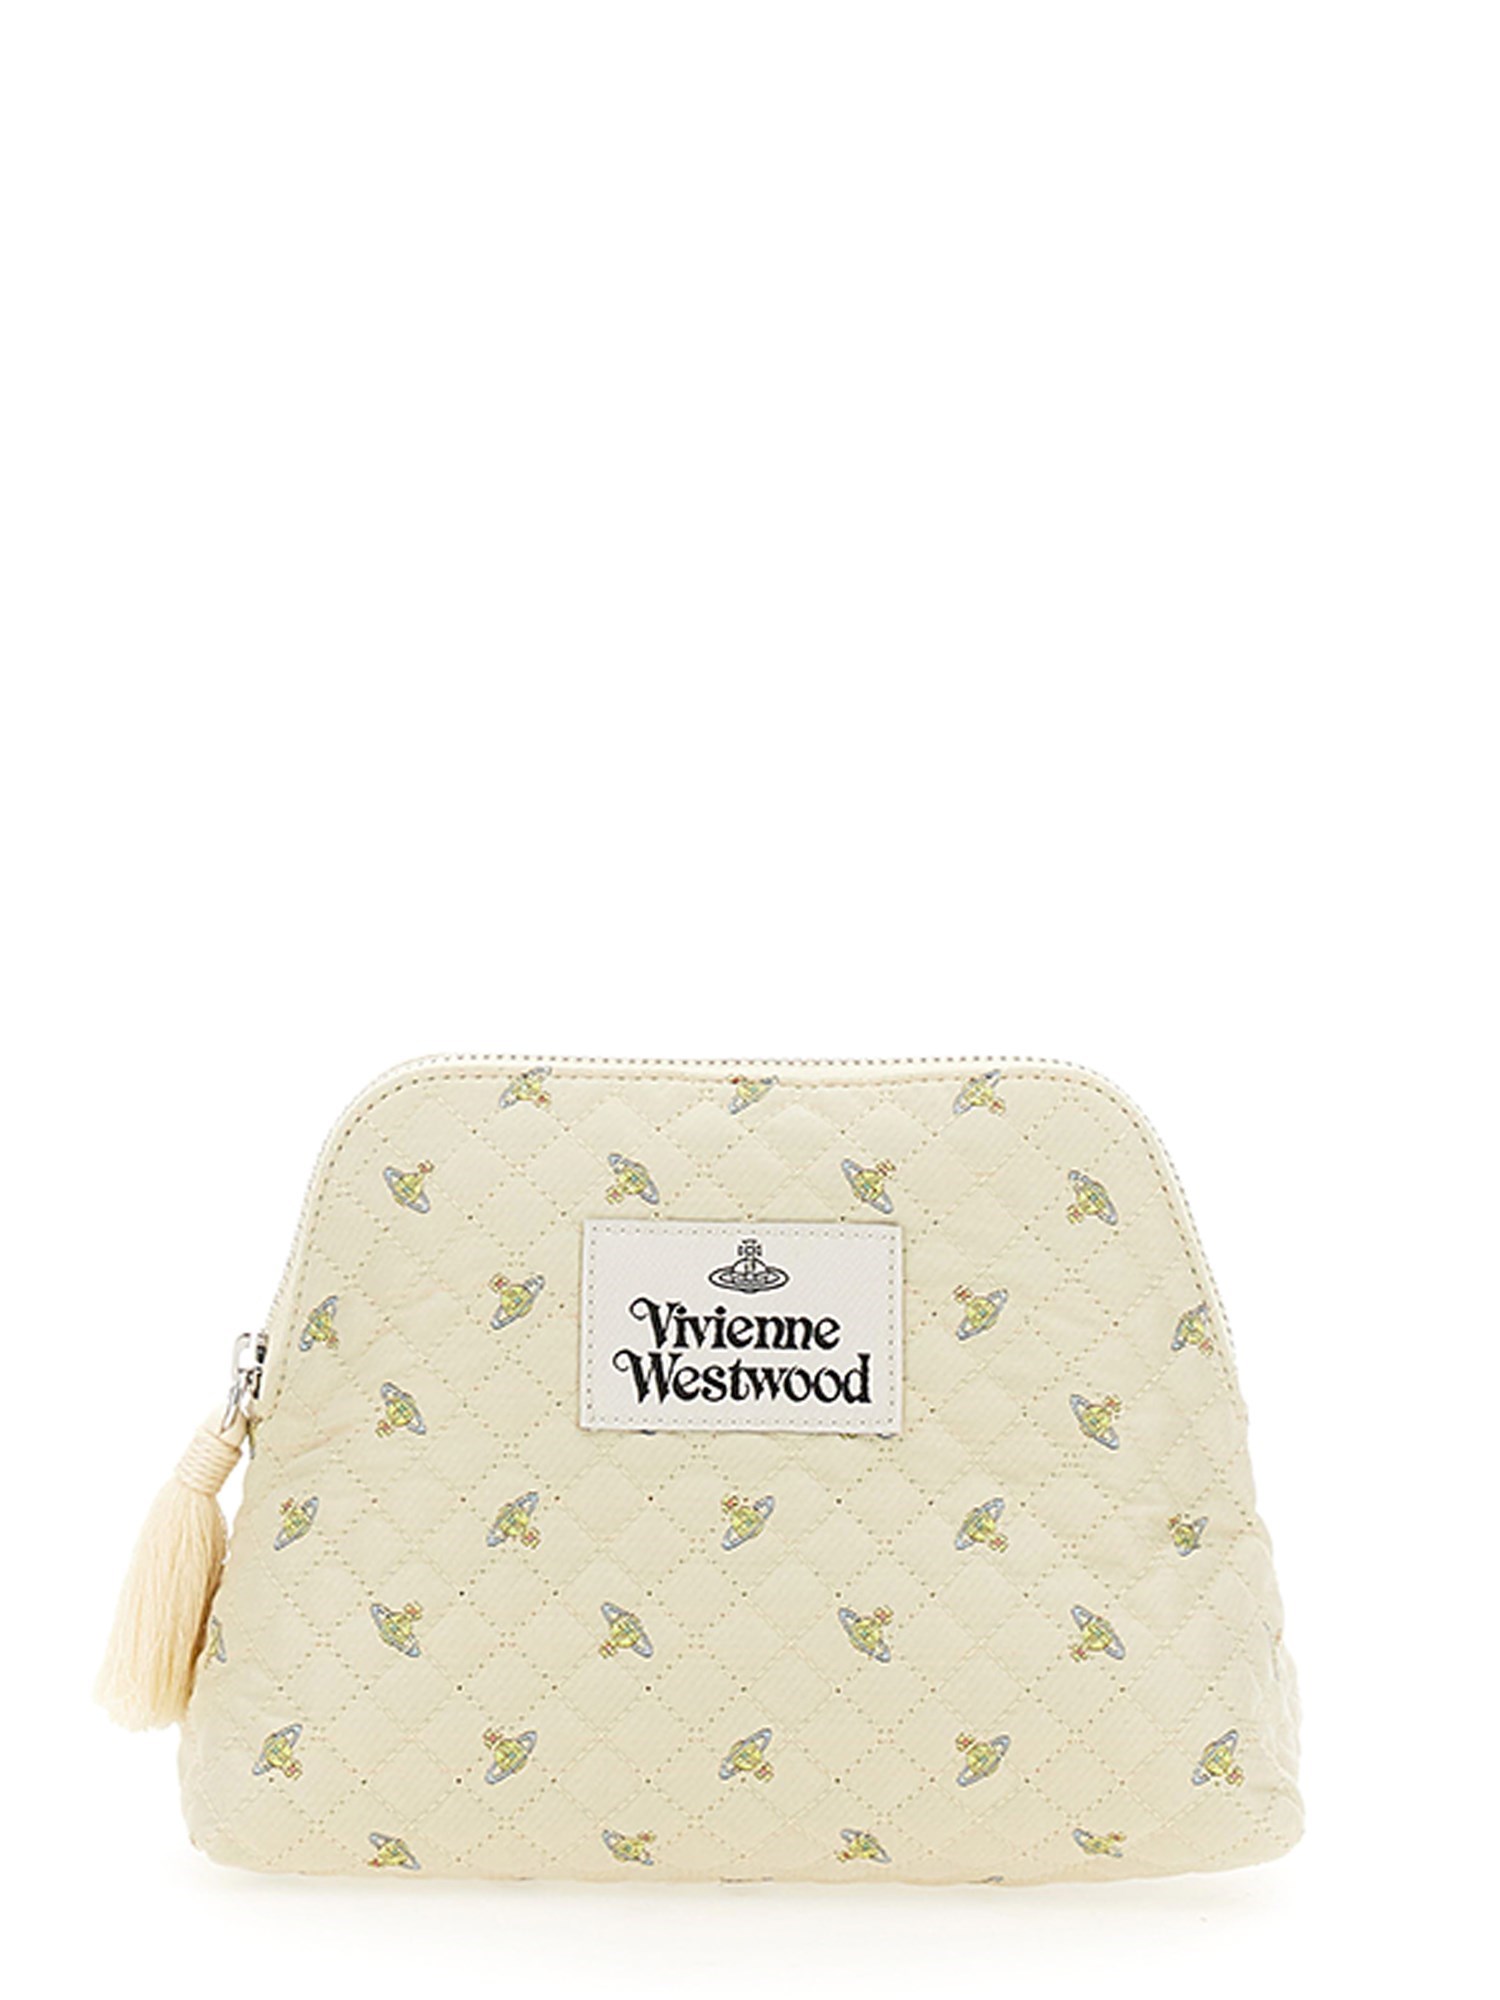 Vivienne Westwood New Bettina beige x gold bag with bear · About